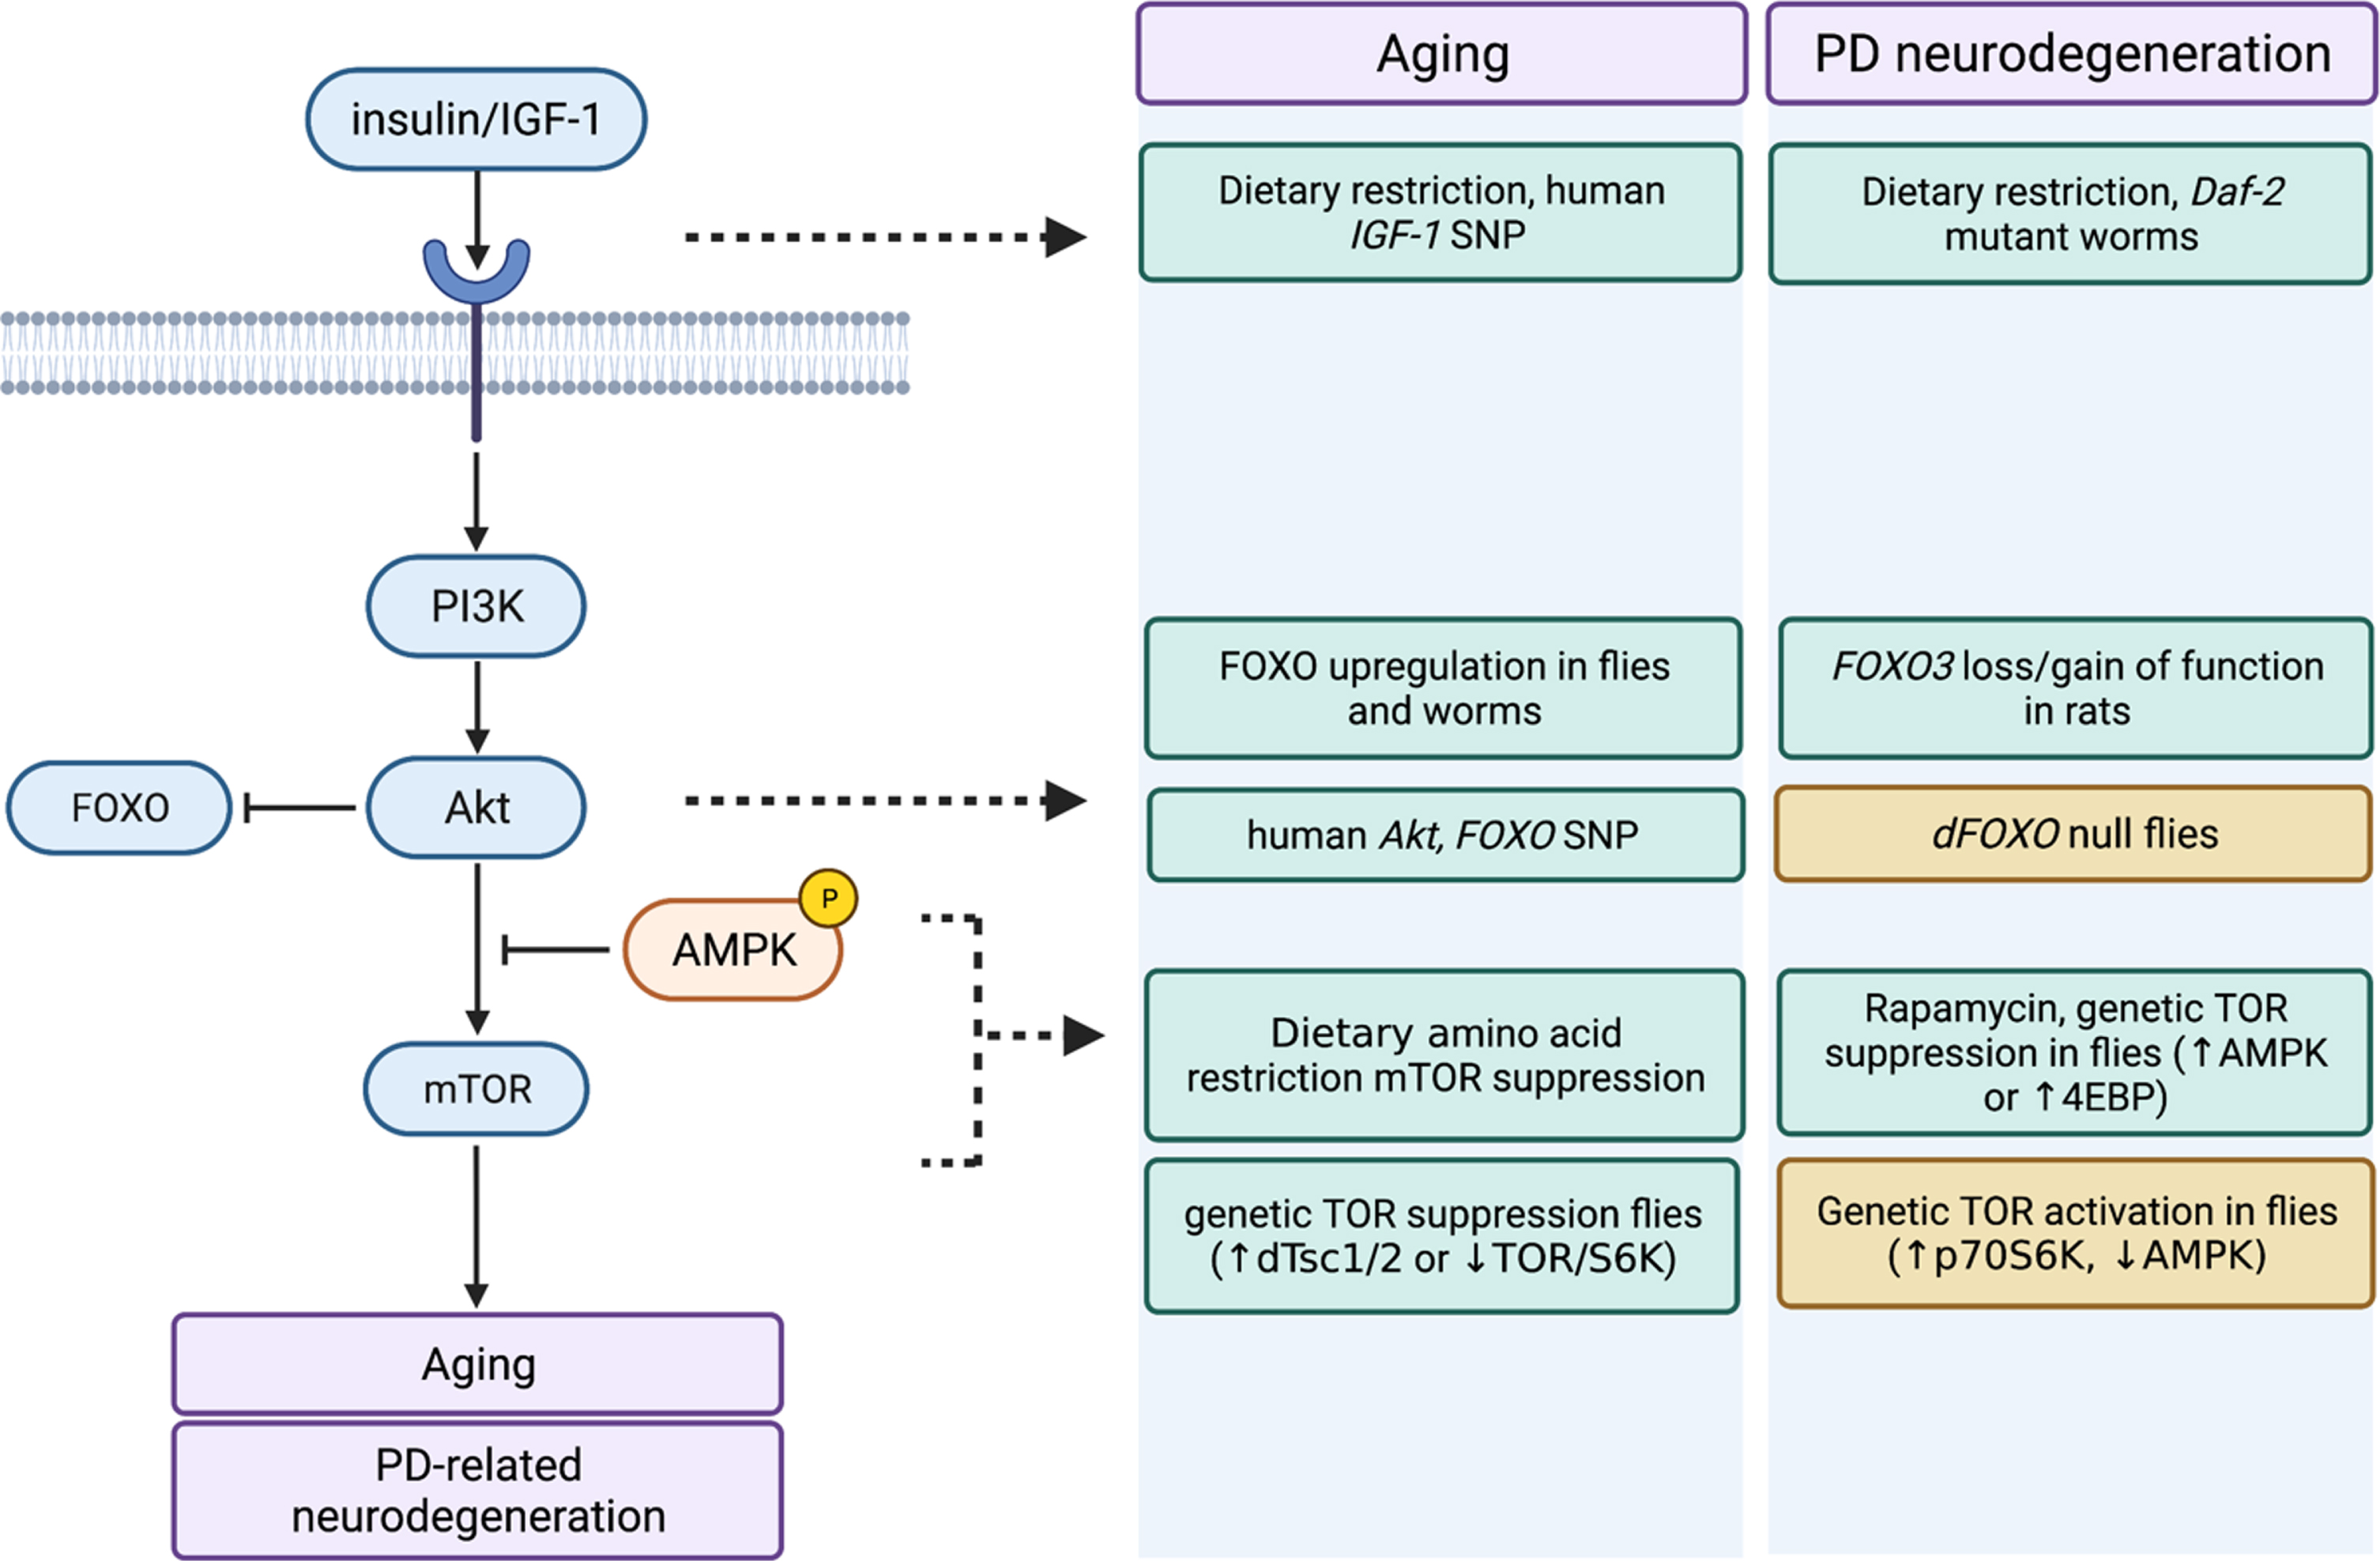 Similar impact of insulin/IGF-1 and mTOR pathway manipulations on aging and PD-related neurodegeneration. Impact of dietary and genetic manipulations on several key nodes throughout the insulin/IGF-1 and connected mTOR signaling pathway on aging and PD-related neurodegeneration are shown. Green boxes denote beneficial effects (i.e., delayed/attenuated aging or PD neurodegeneration) and orange boxes denote deleterious effects (i.e., accelerated aging or PD neurodegeneration). Figure was created on BioRender.com.